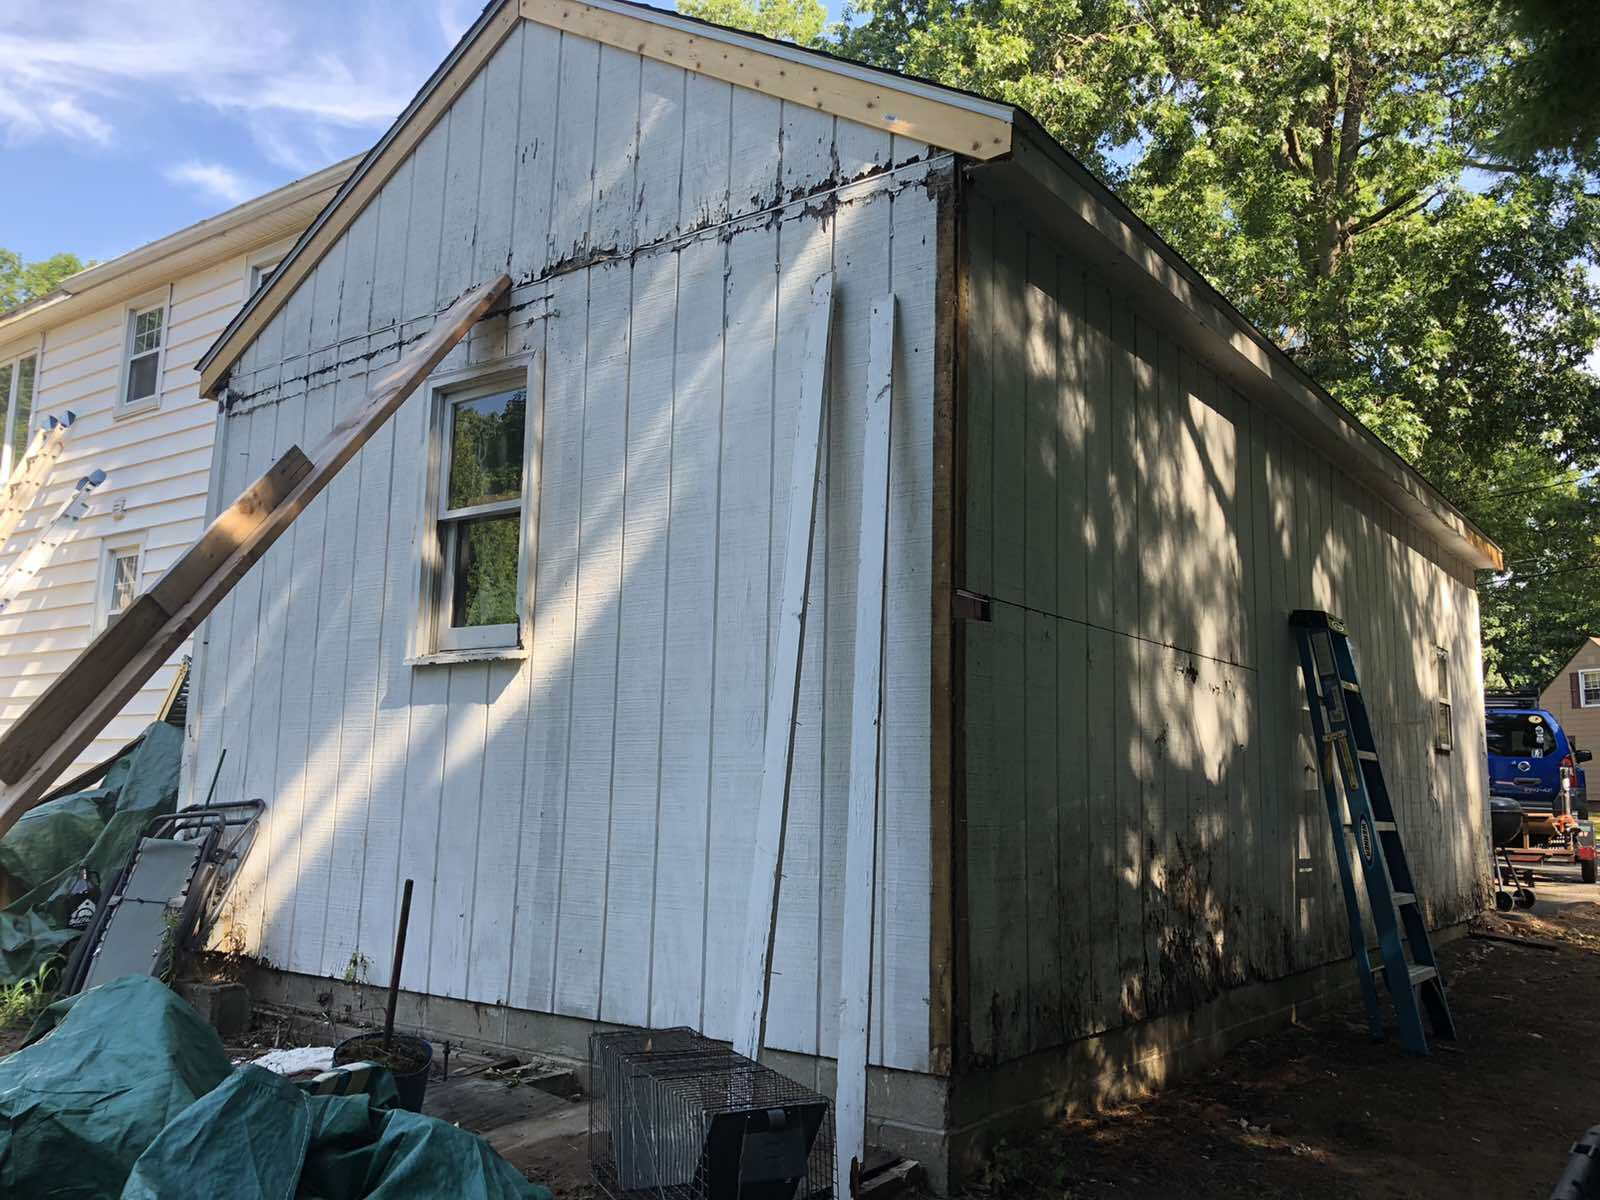 Weathered aluminum siding from the New England weather. Ready to be replaced with new vinyl siding.